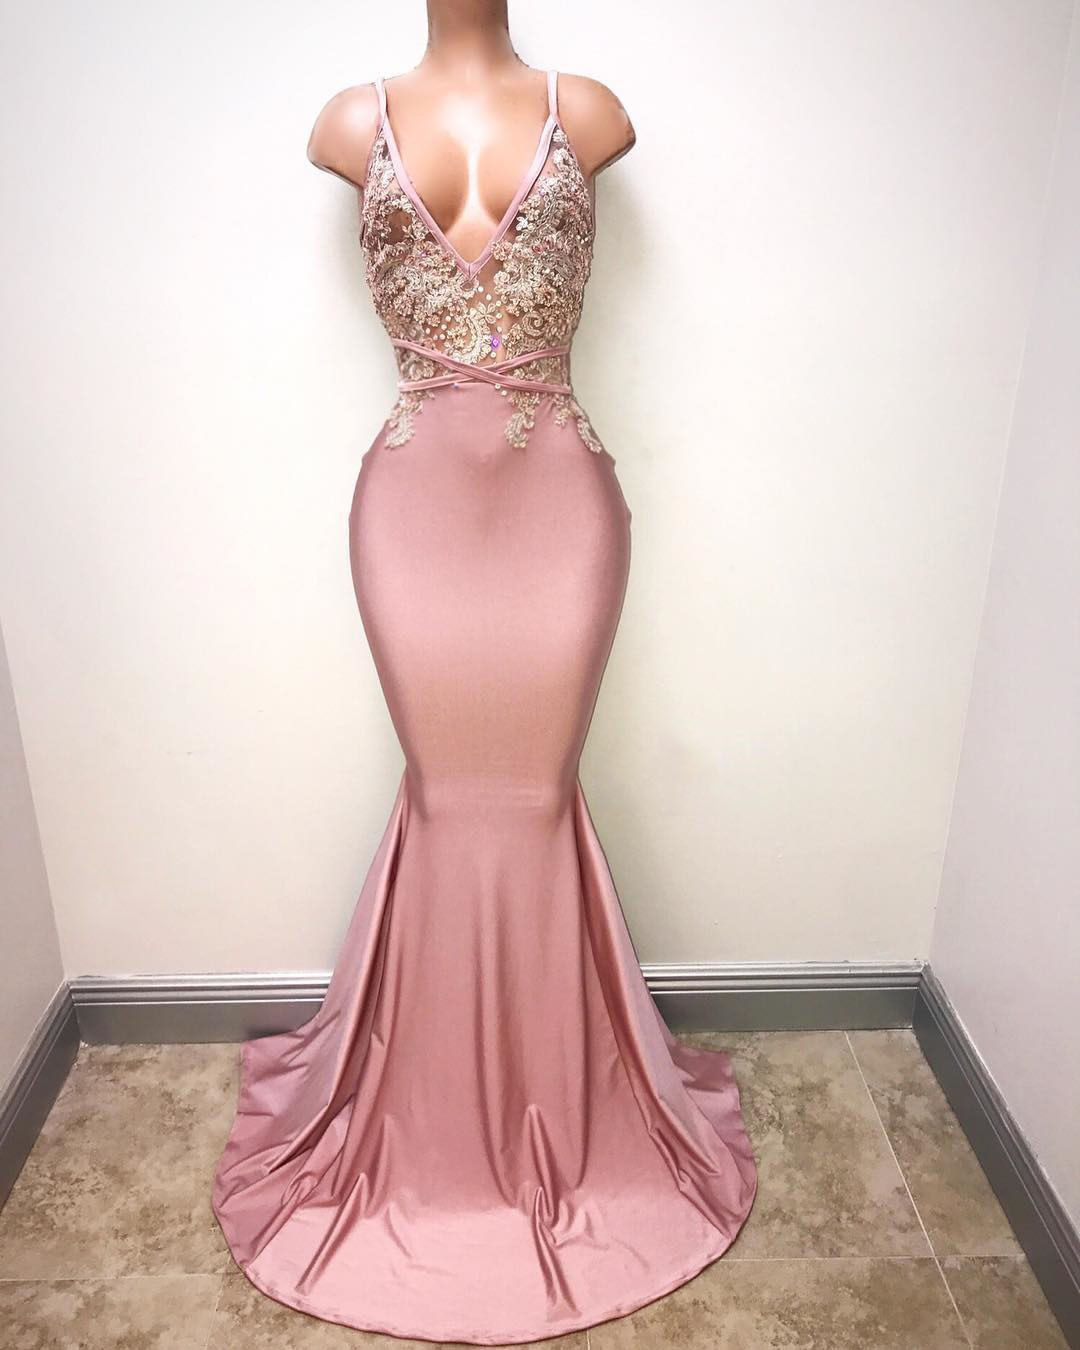 V Neck Backless Prom Dress With Long Tie Straps